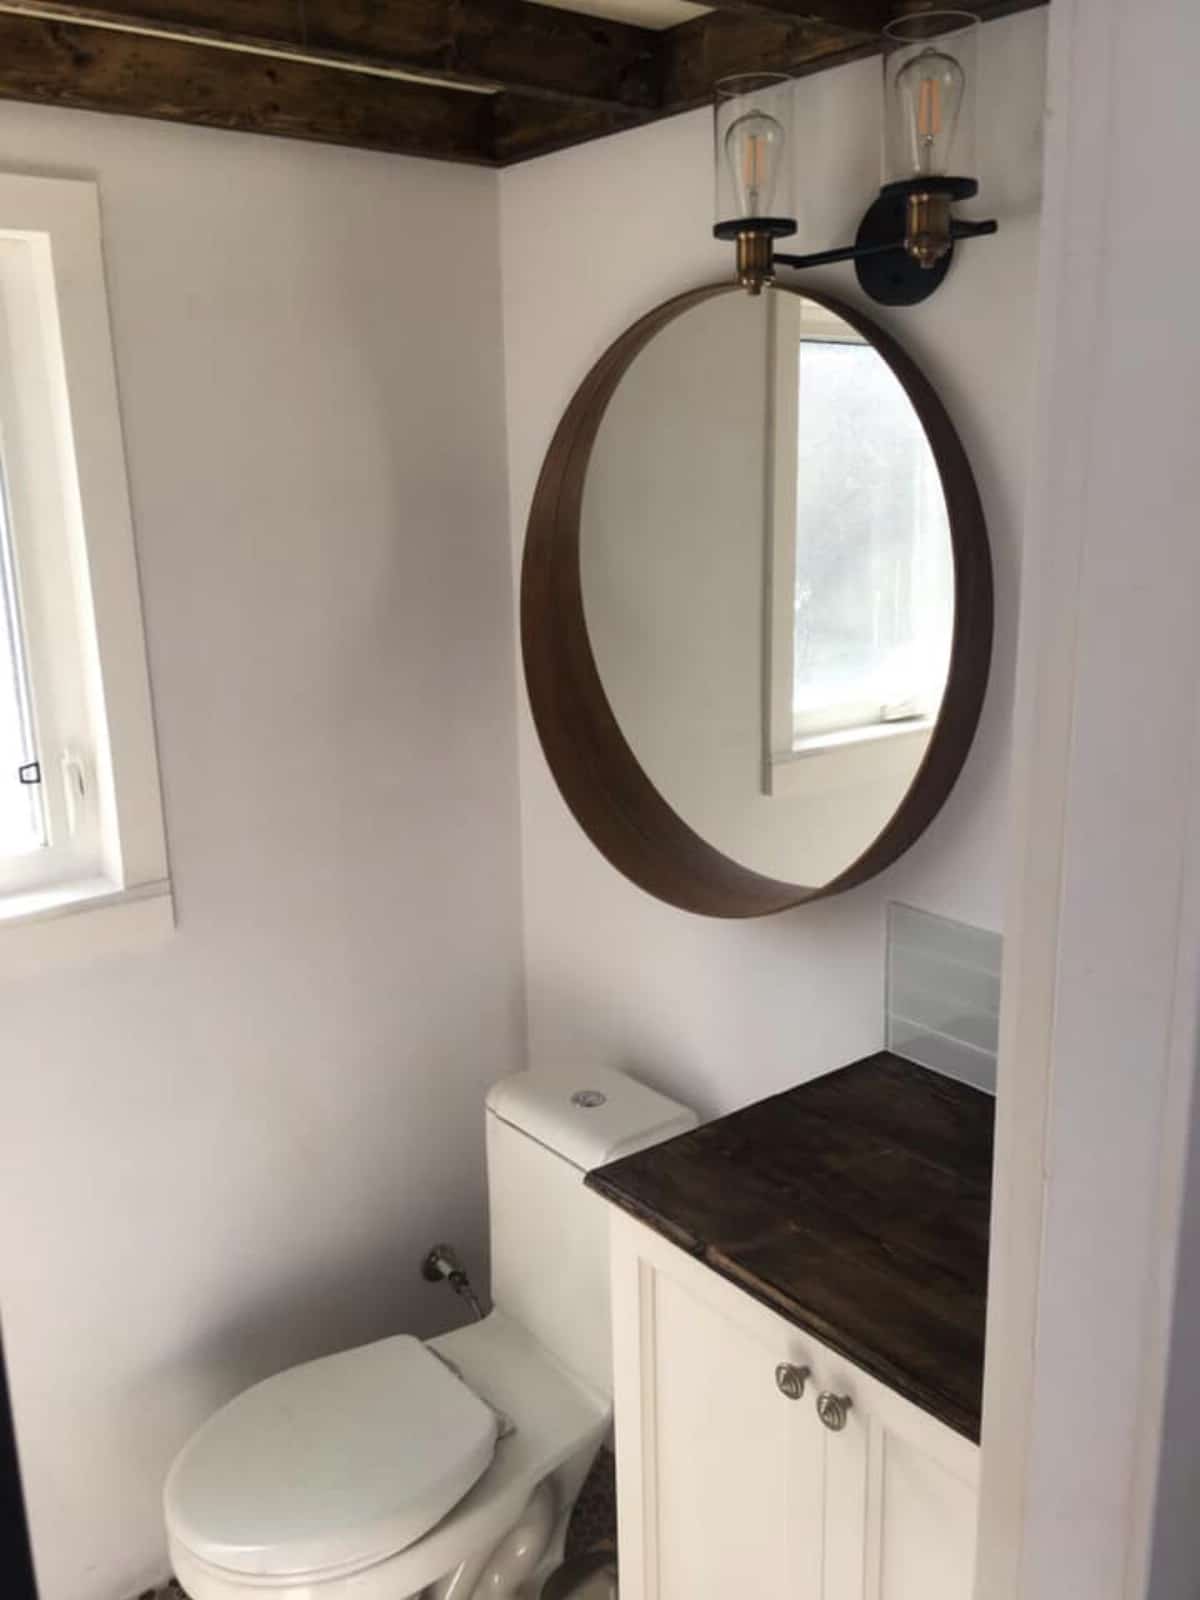 Bathroom with large round mirror